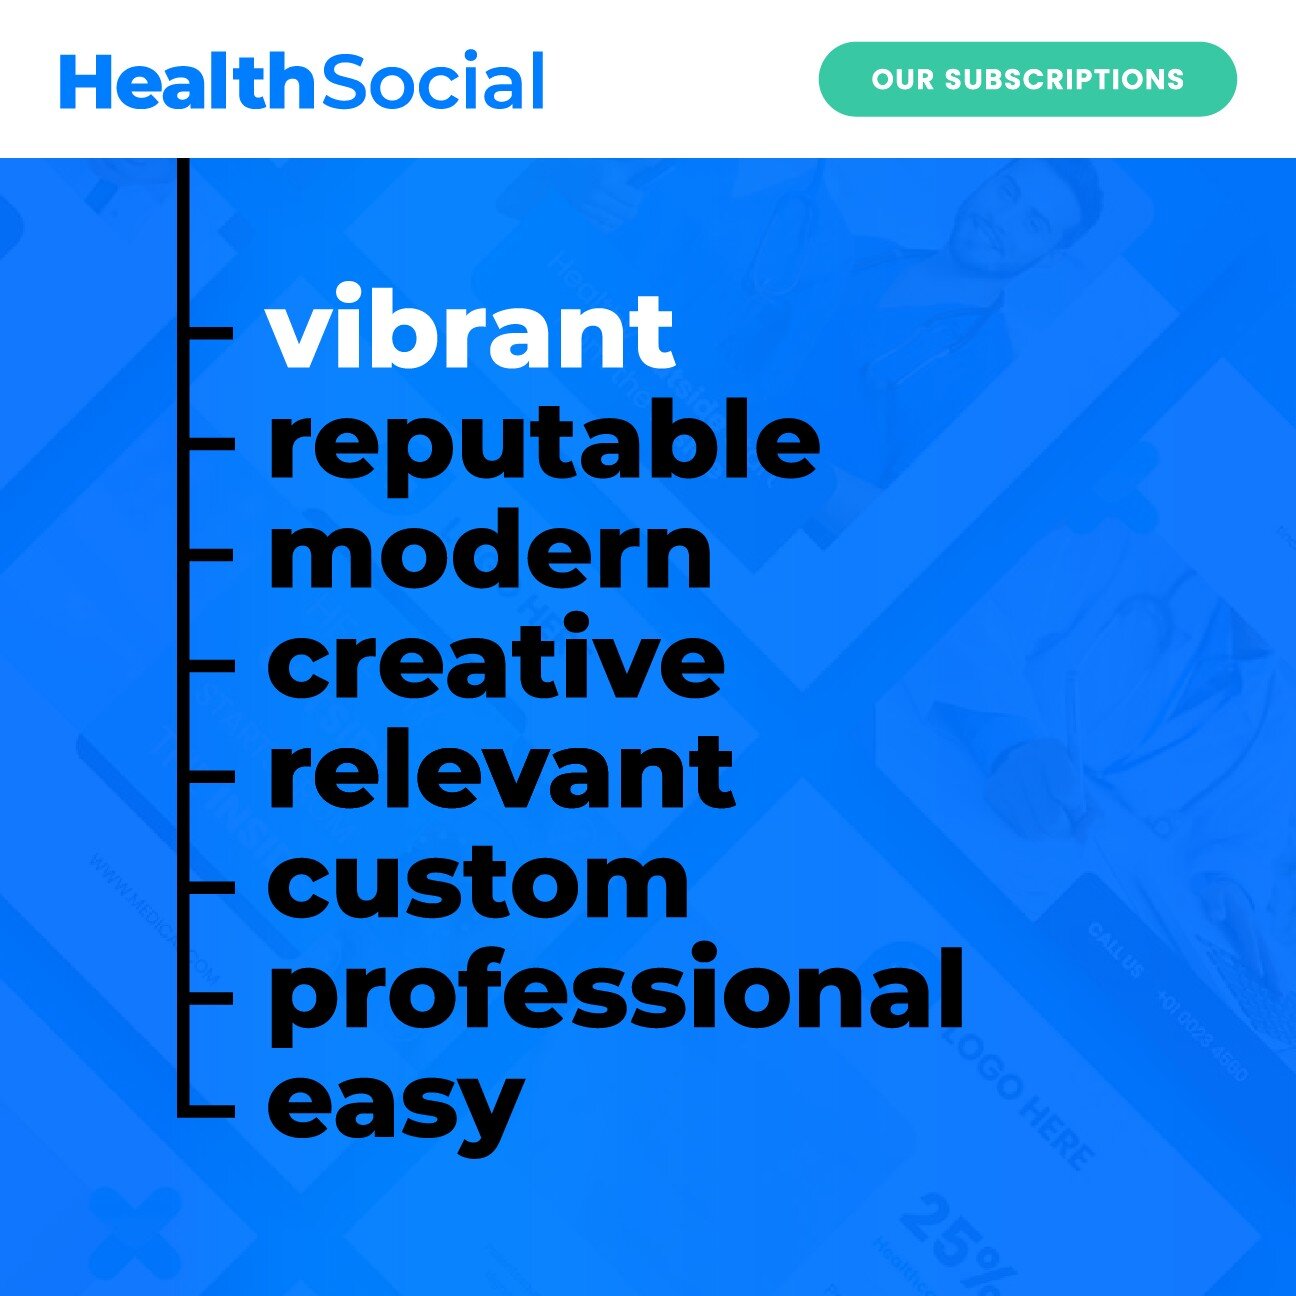 WE DESIGN VIBRANT, BRANDED SOCIAL POSTS!

Establishing your credibility on social media helps build upon your hard-earned digital reputation with potential patients who have googled your practice/business, checked out your website, and are now checki